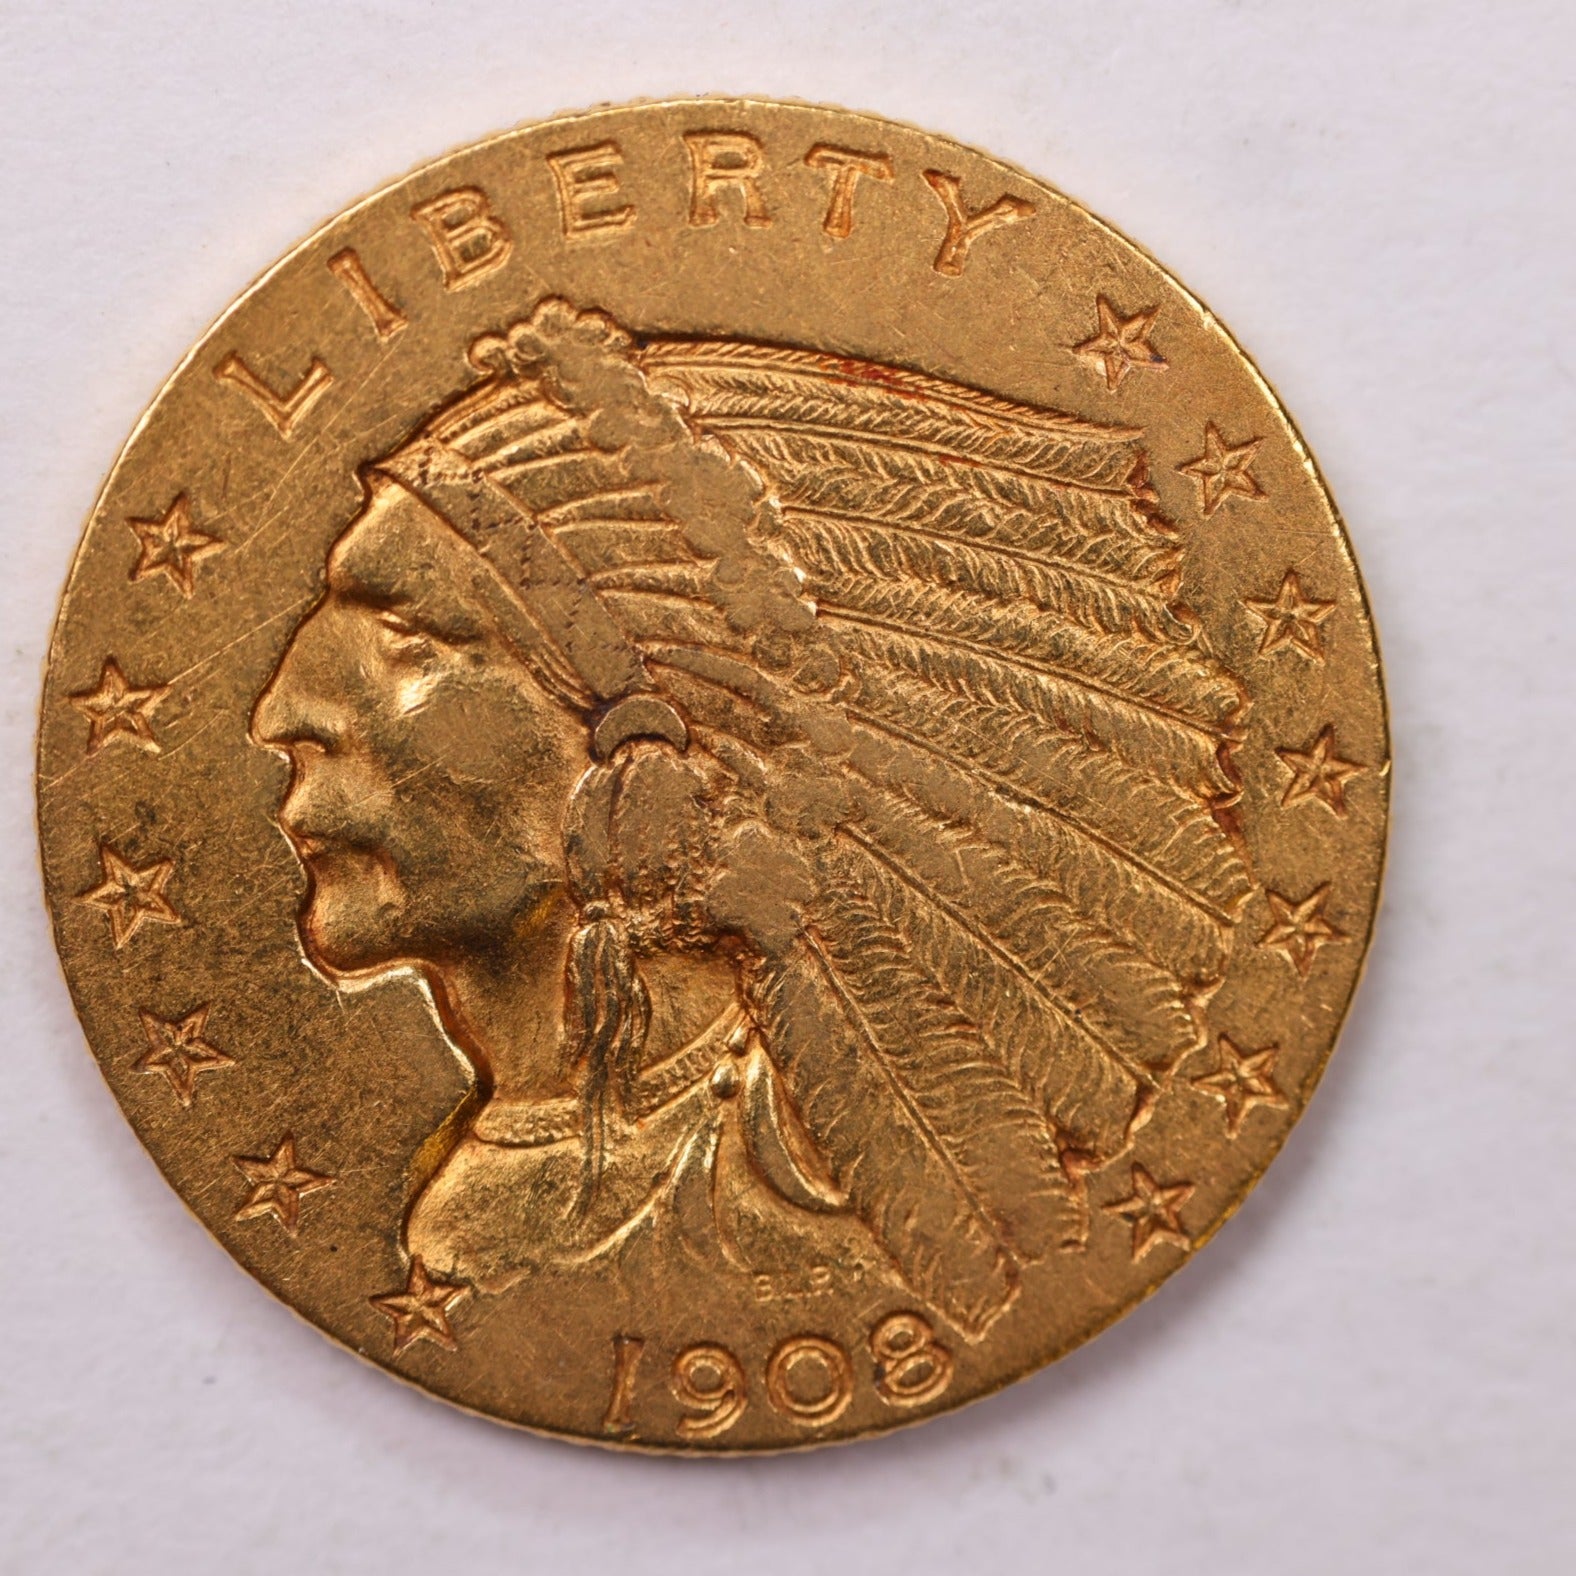 1908 $2.50 Quarter Gold Eagle. Affordable Collectible Coins. Store #18